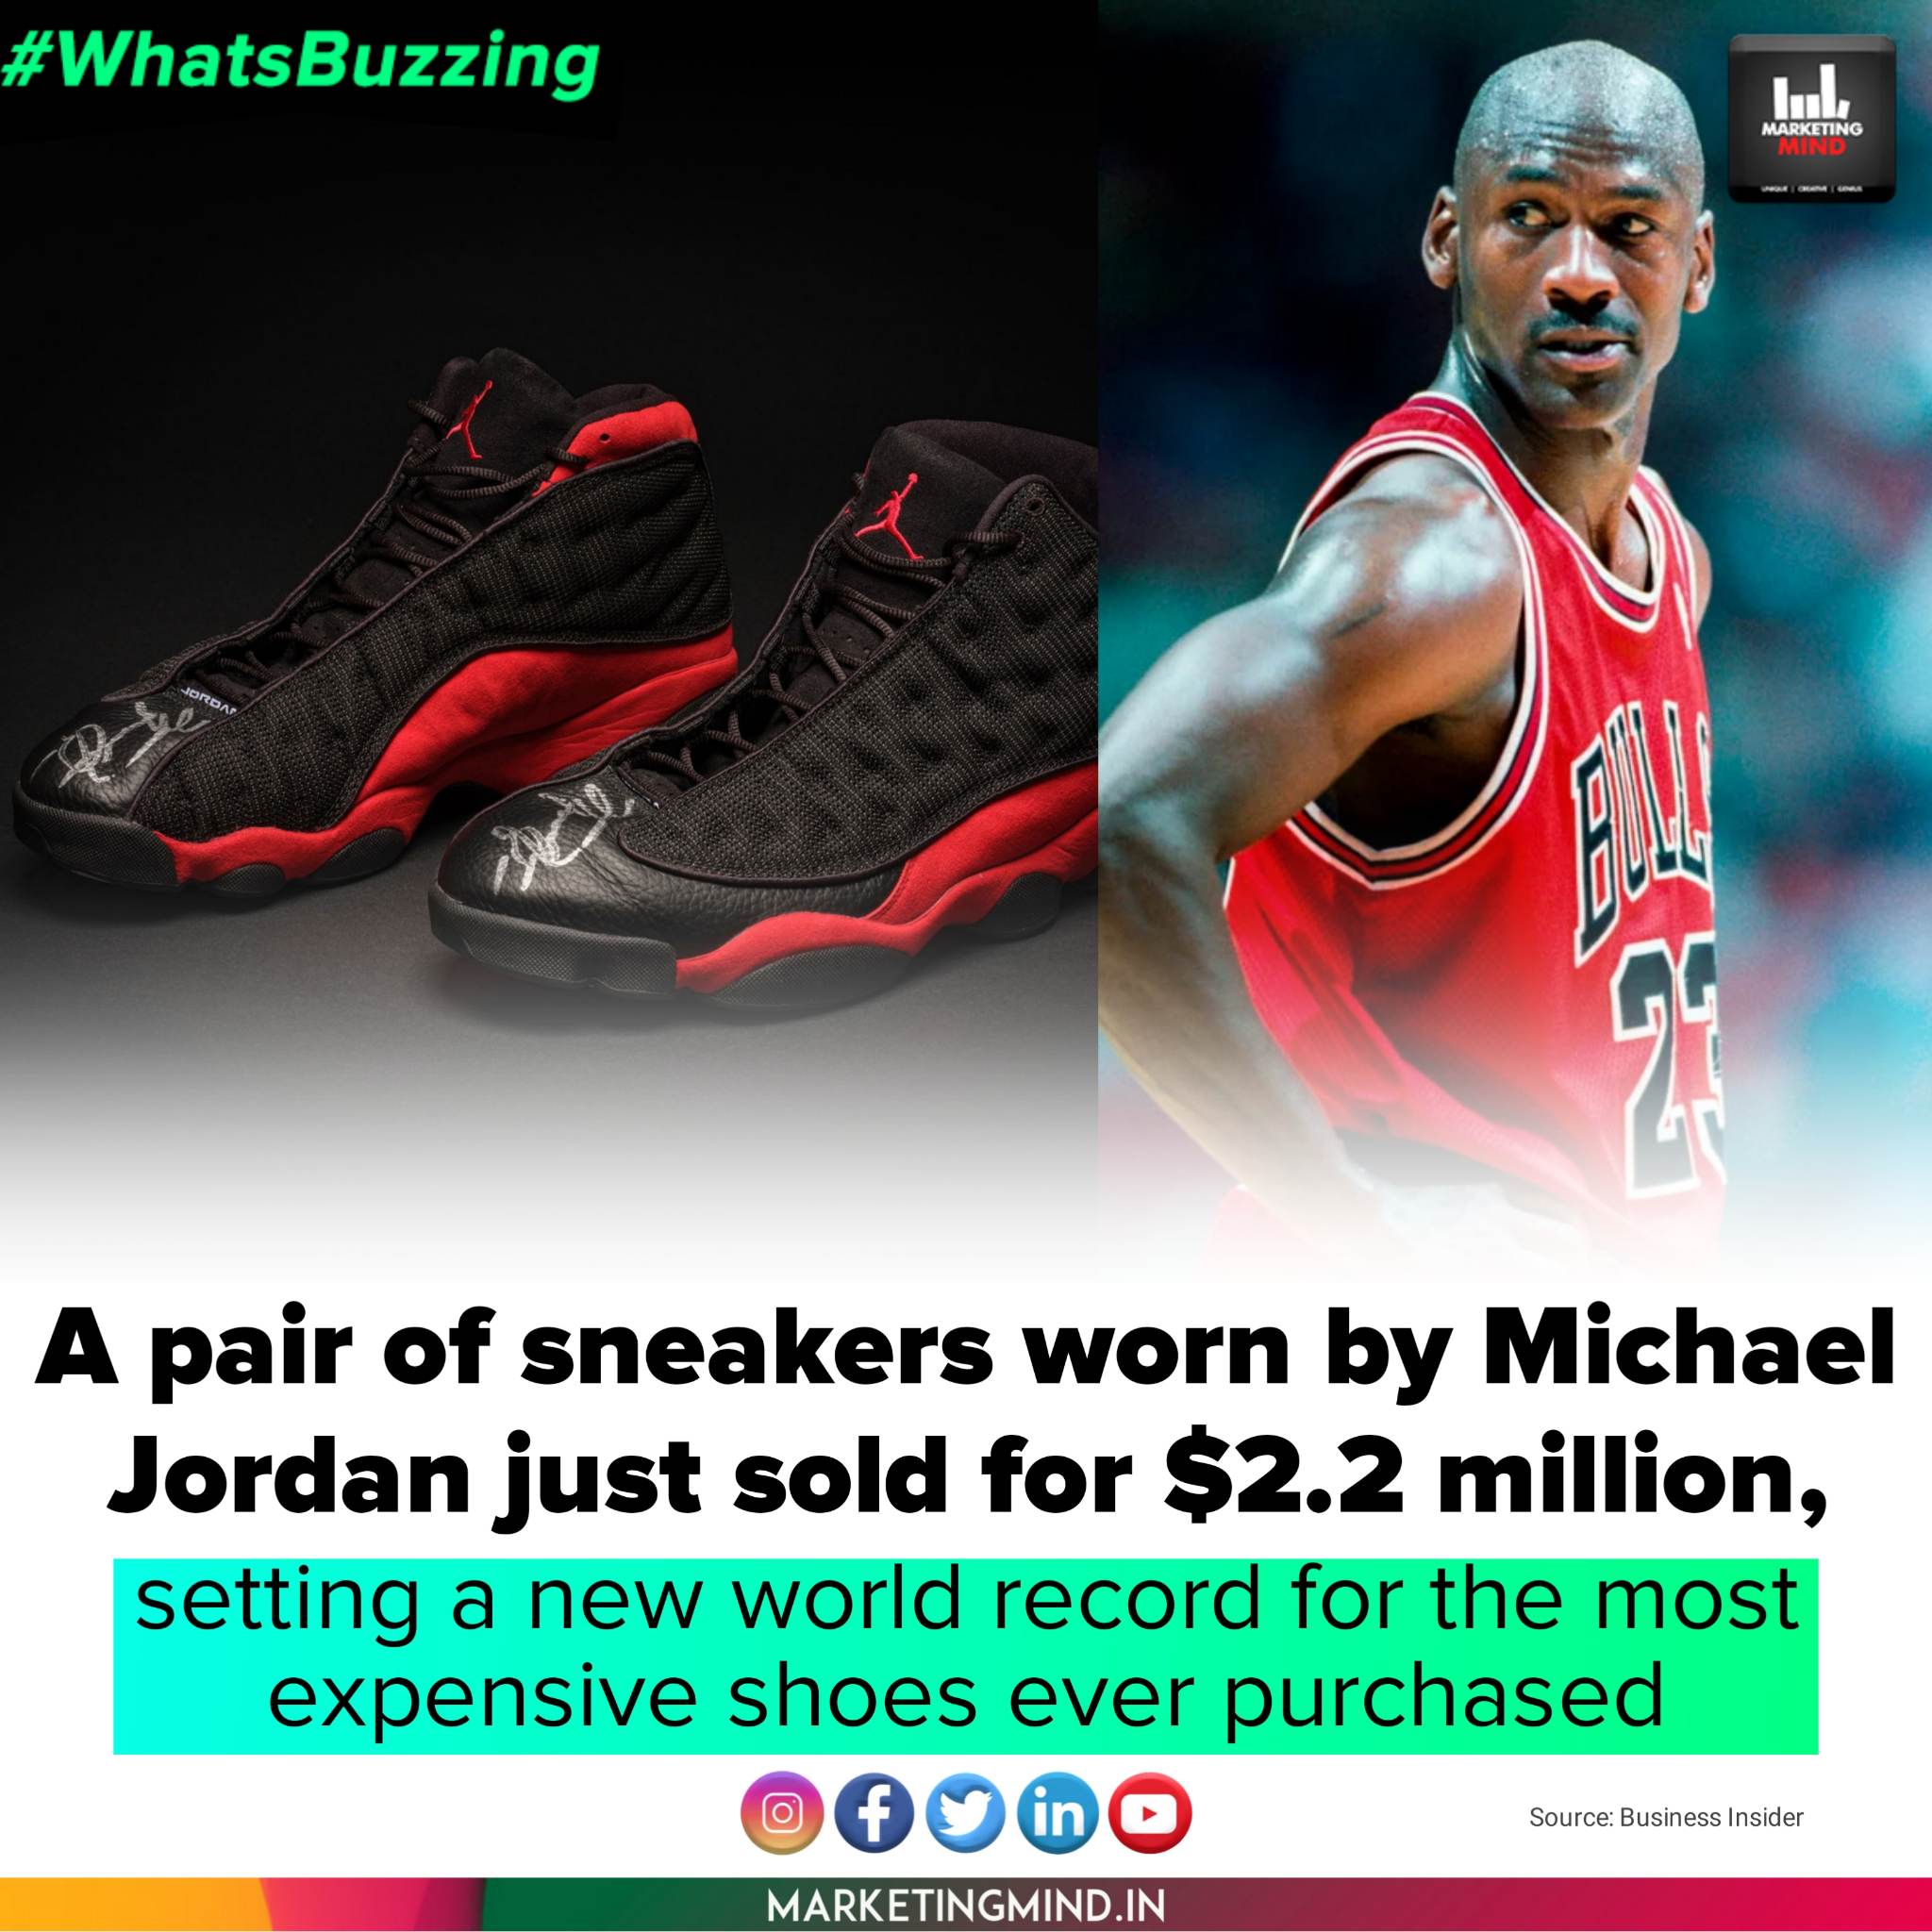 These shoes cost $17 million